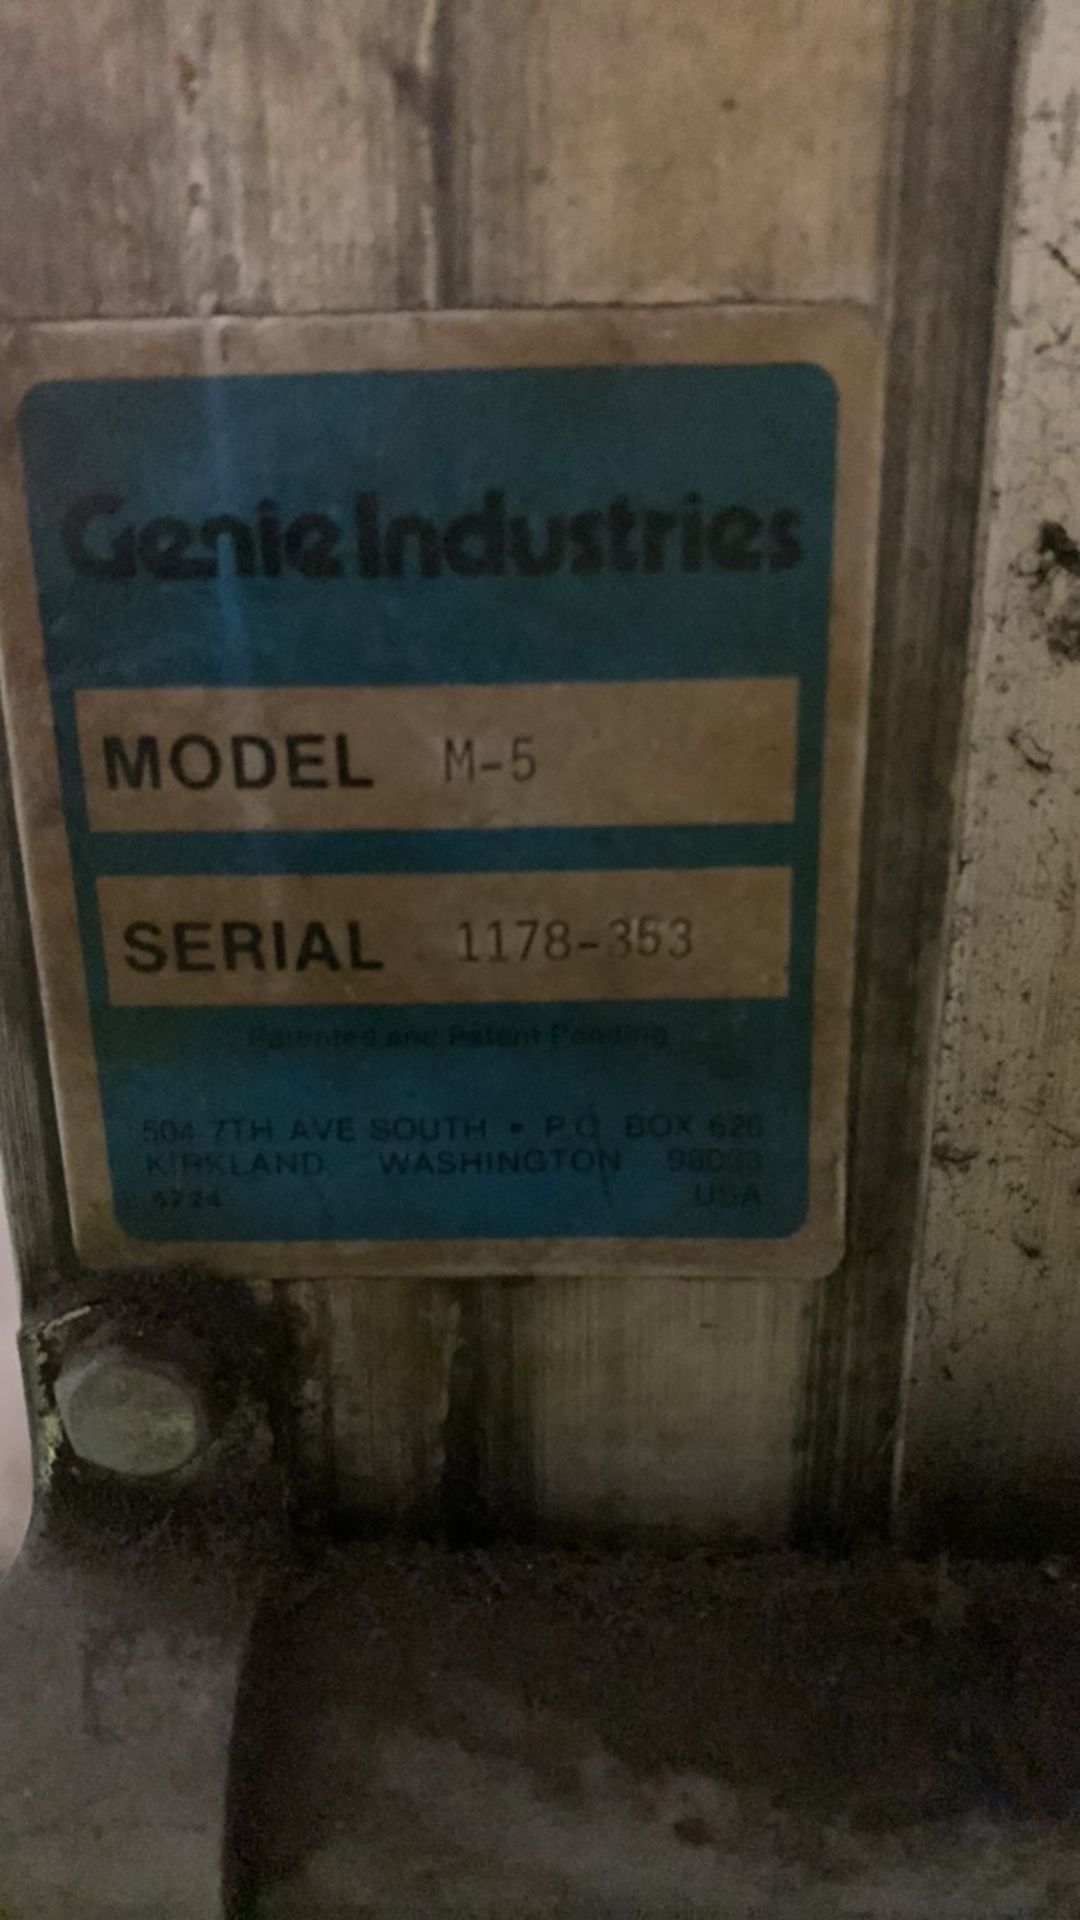 Genie Industries M-5 Manual Mobile Material Lifter, Serial No 1178-353 - Image 3 of 3